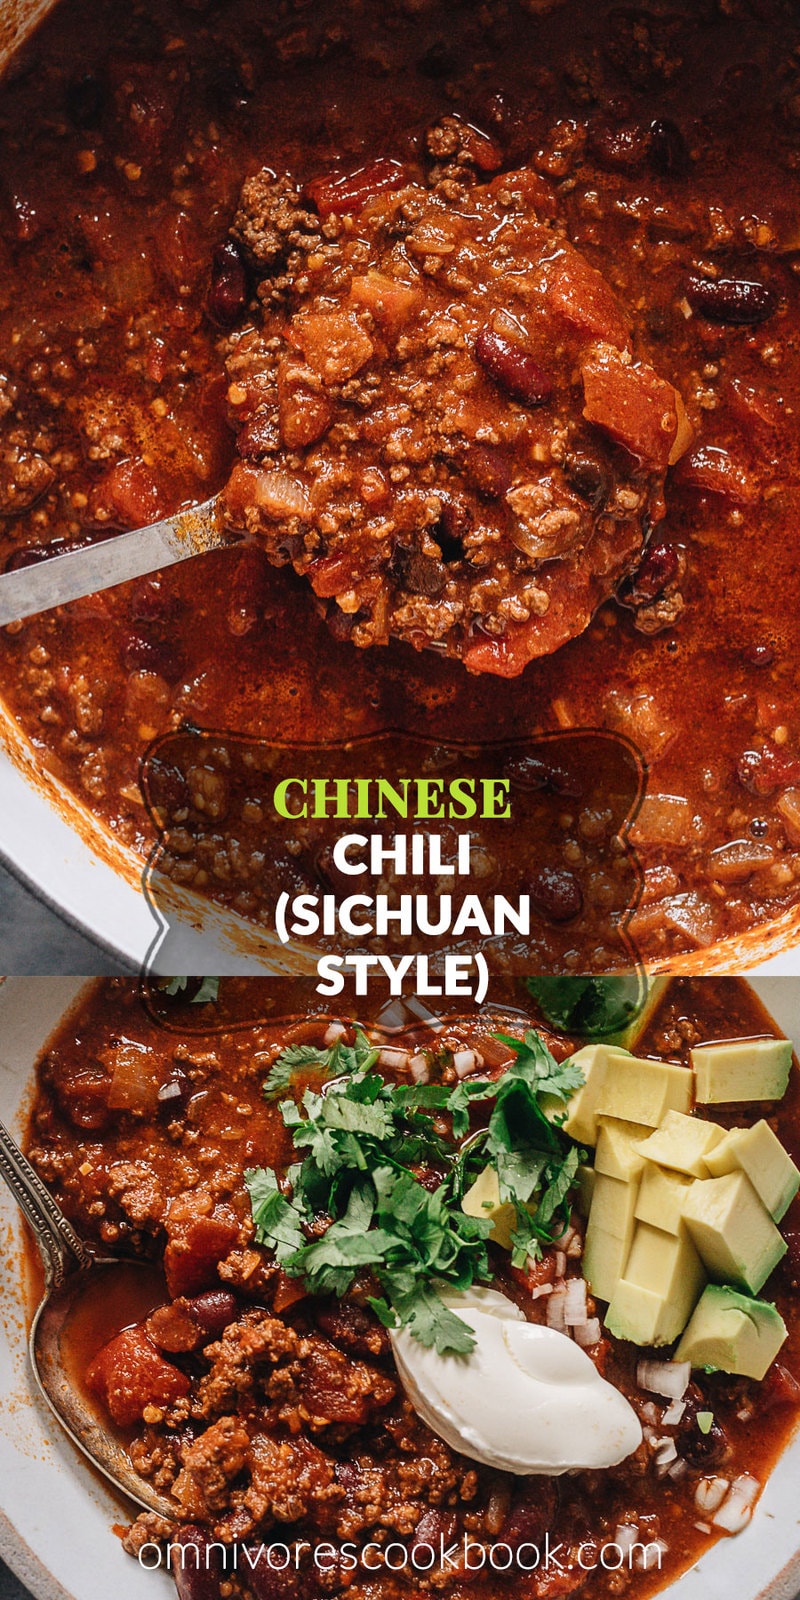 Chinese Chili (Sichuan Style) | Make a hearty pot of chili using Sichuan ingredients to create a super rich and deep umami while keeping the essence of a traditional chili. The recipe teaches you how to make a flavorful chili paste, but you can also use chili powder to make the recipe super easy.